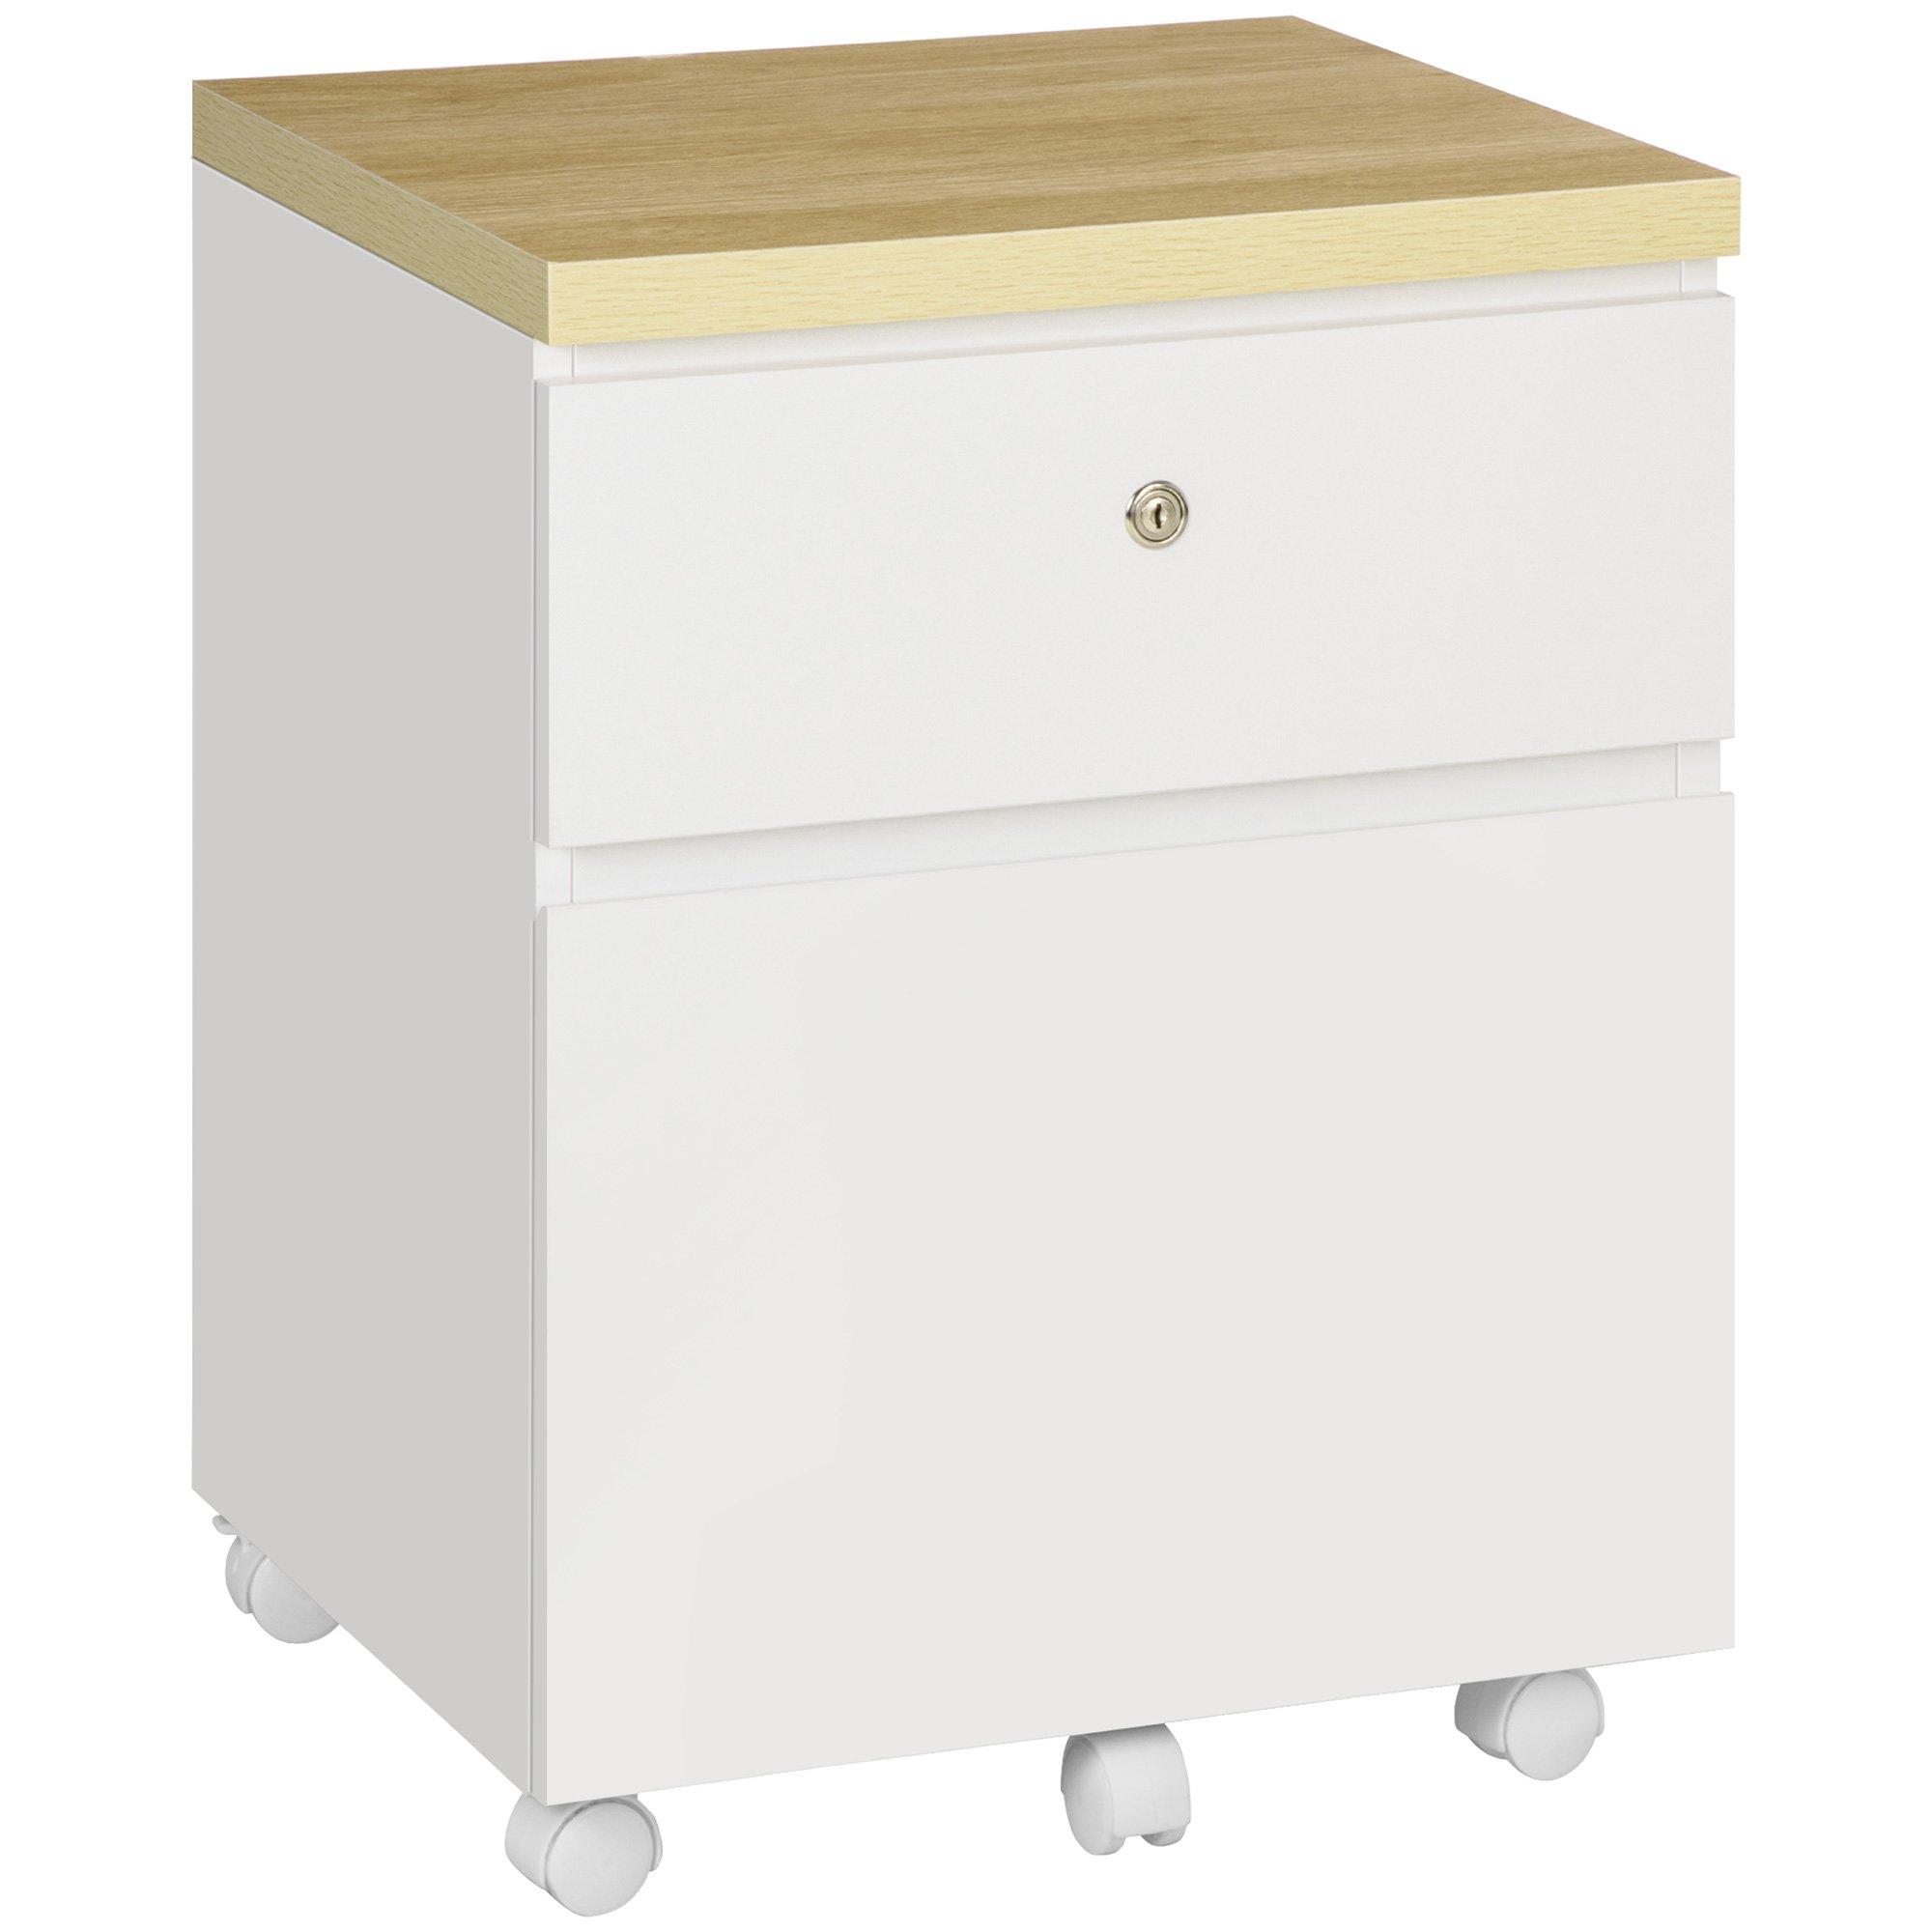 2-Drawer Filing Cabinet Mobile File Cabinet Legal Size with Lock Wheels